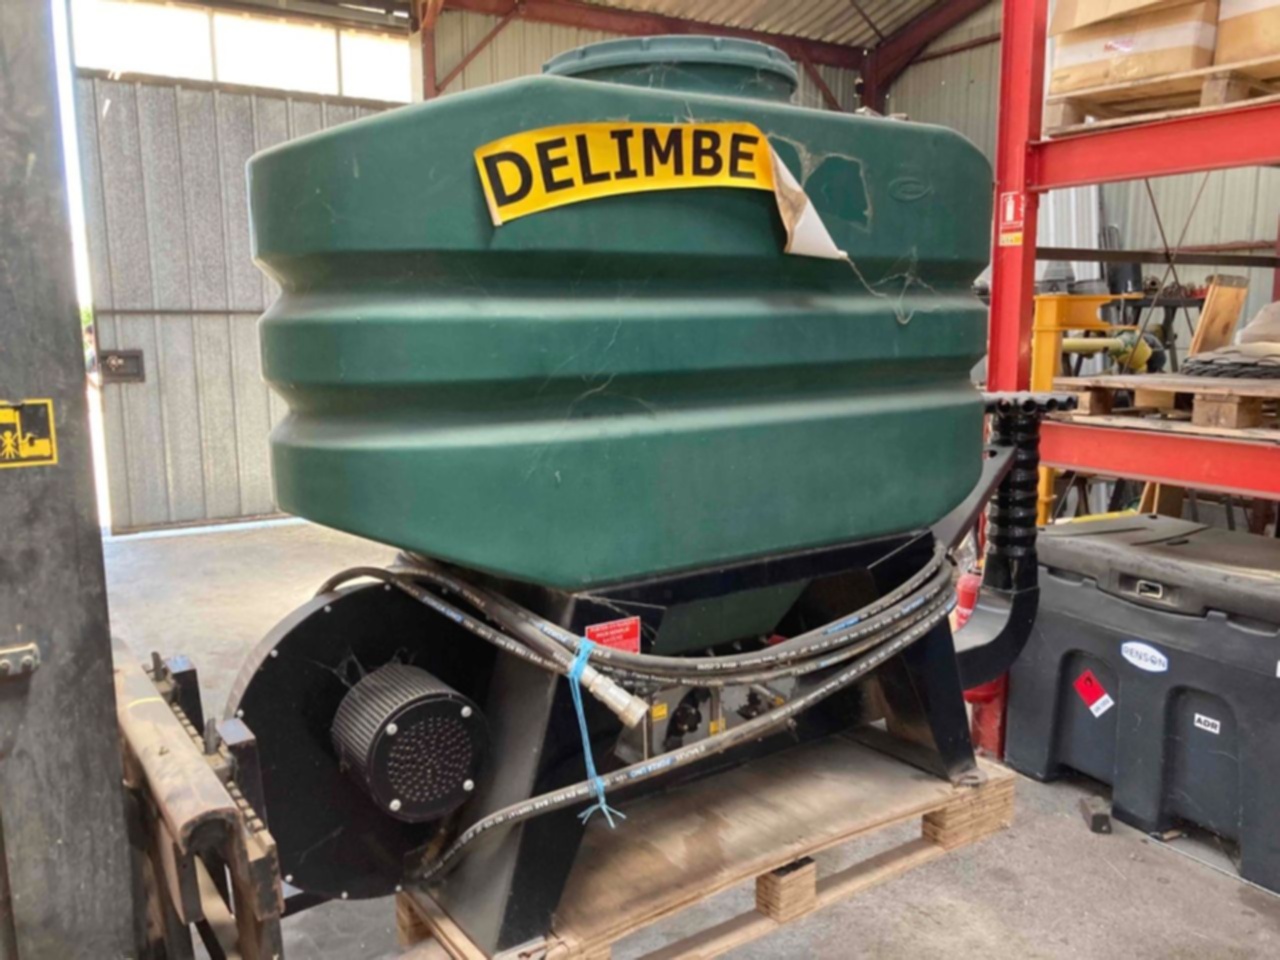 Delimbe t20 800 litres direct_sowing_machine 3 190 €